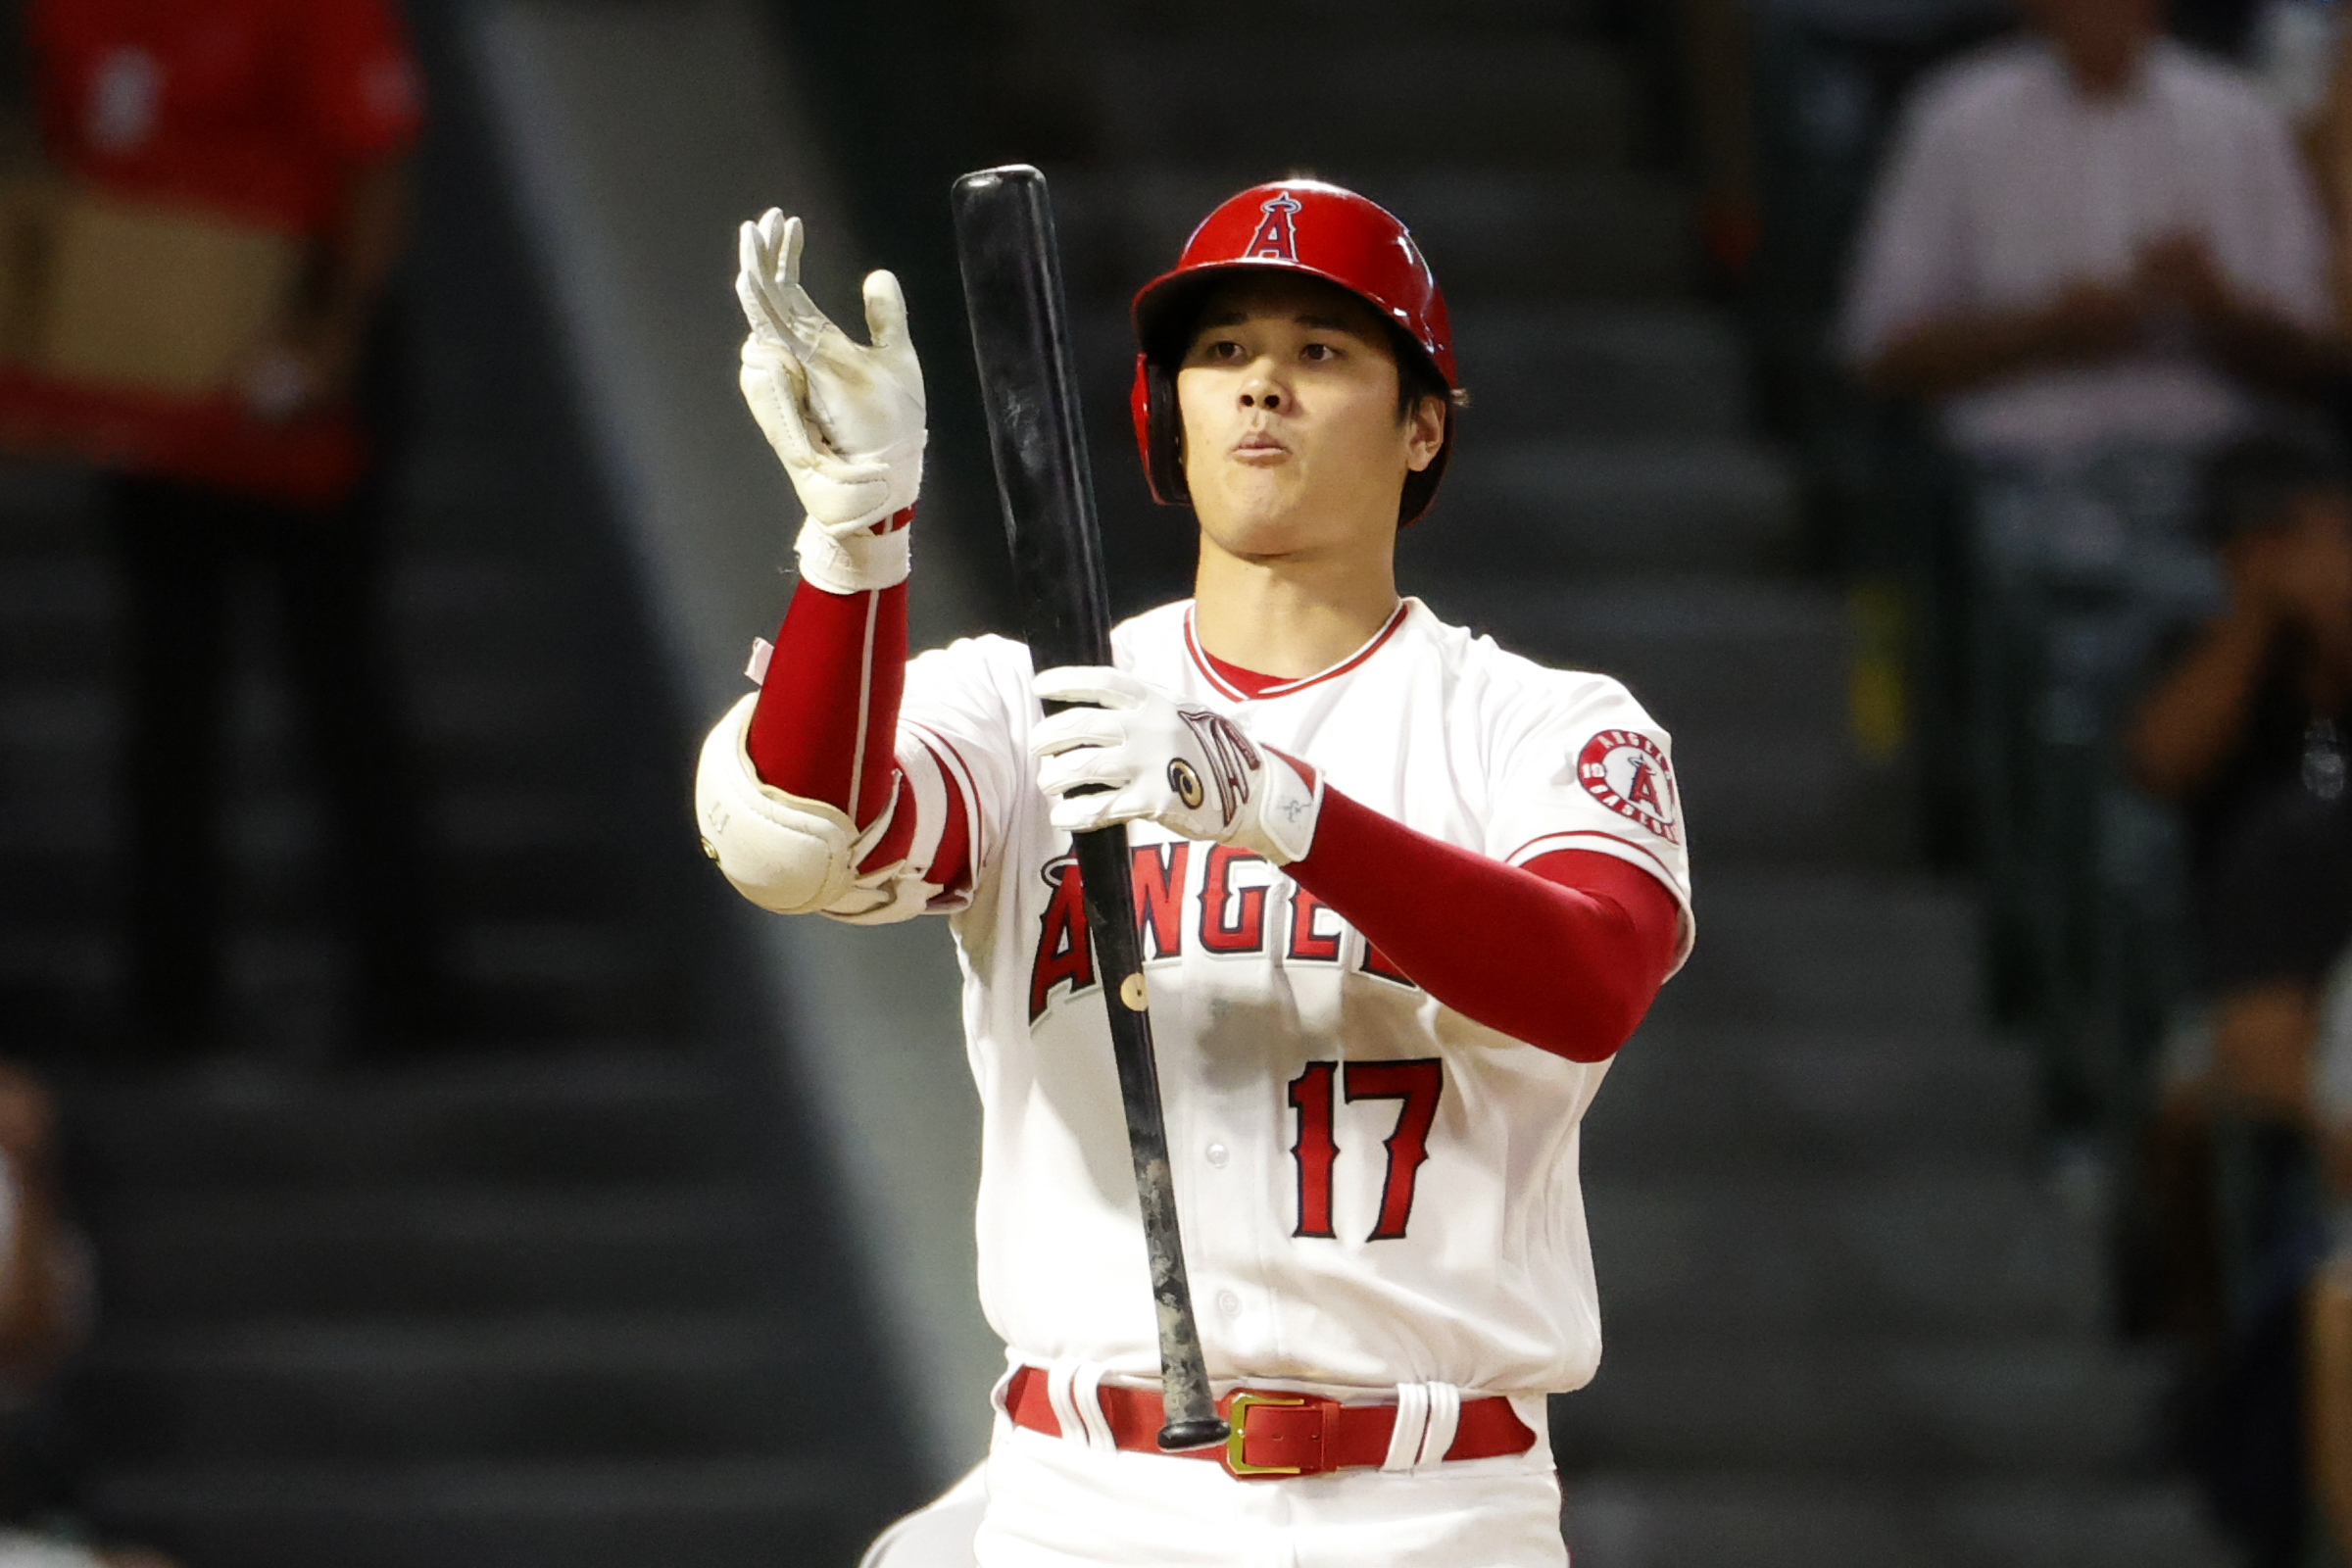 Los Angeles Angels' Shohei Ohtani, Mike Trout lead way as MLB